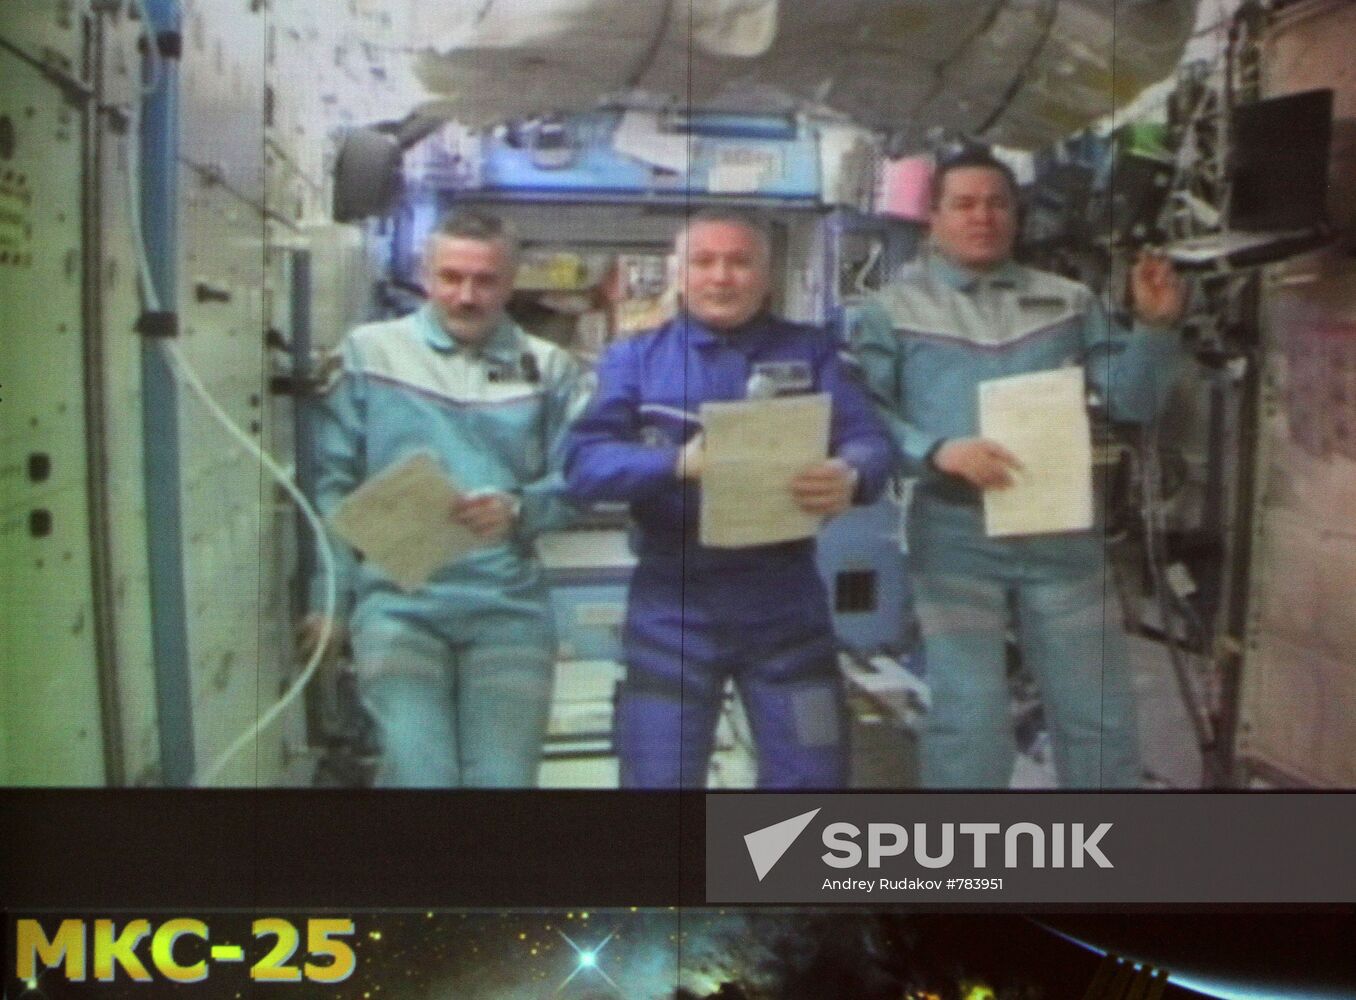 ISS-25 crew takes part in population census